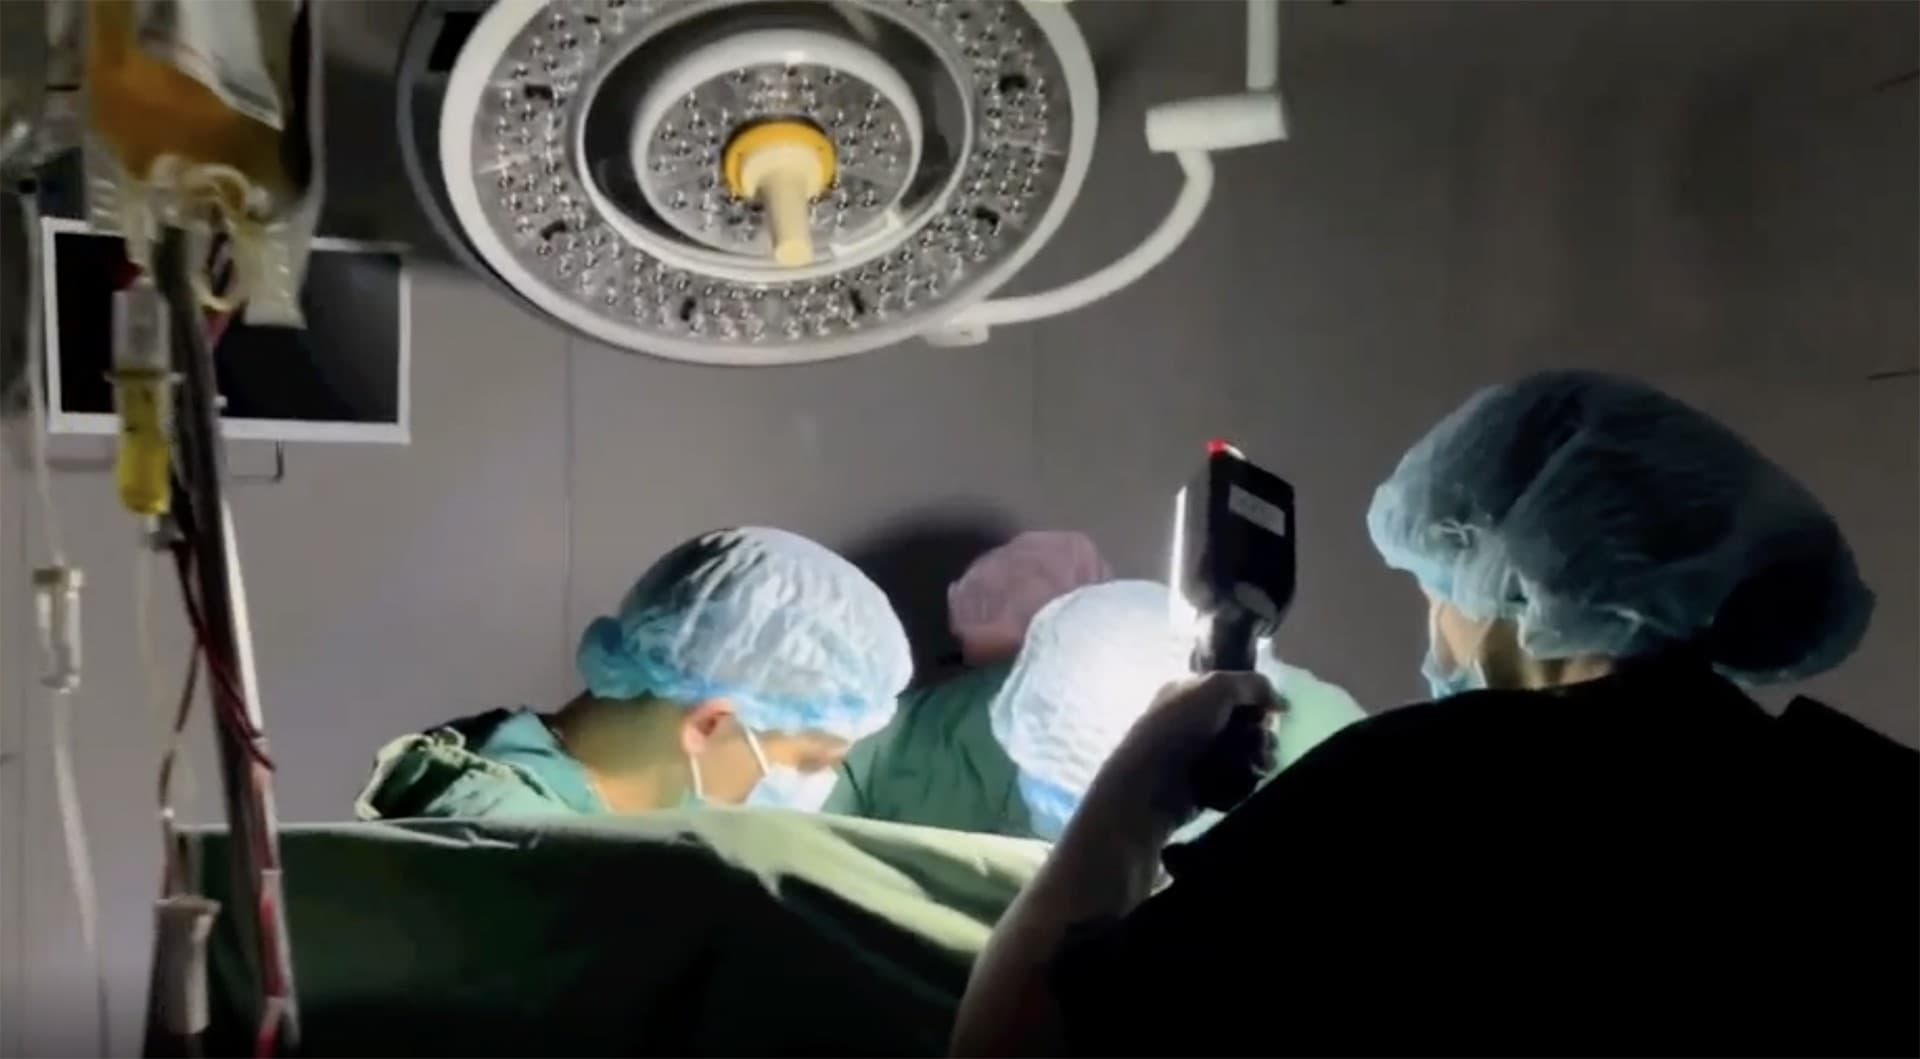 Ukrainian doctors perform surgery by torchlight in Kyiv